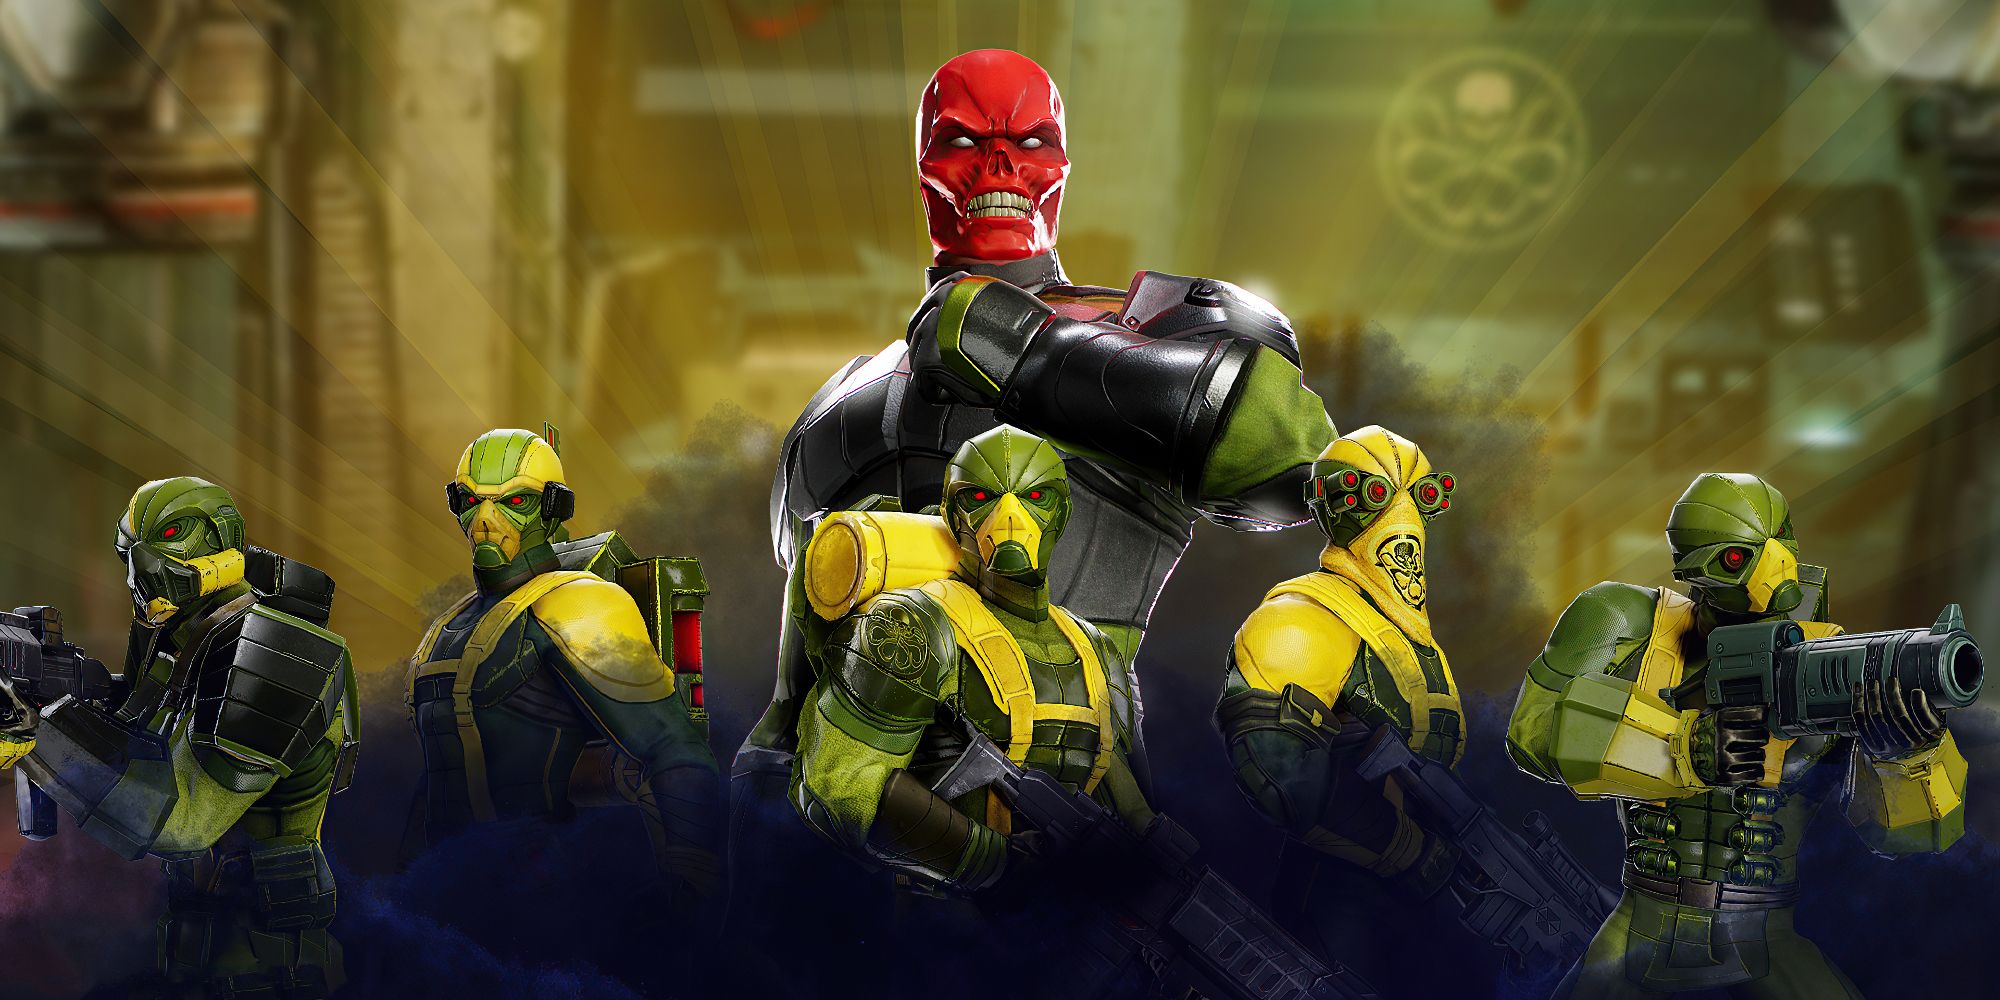 Red Skull looming over HYDRA minions in promo art for Marvel Strike Force